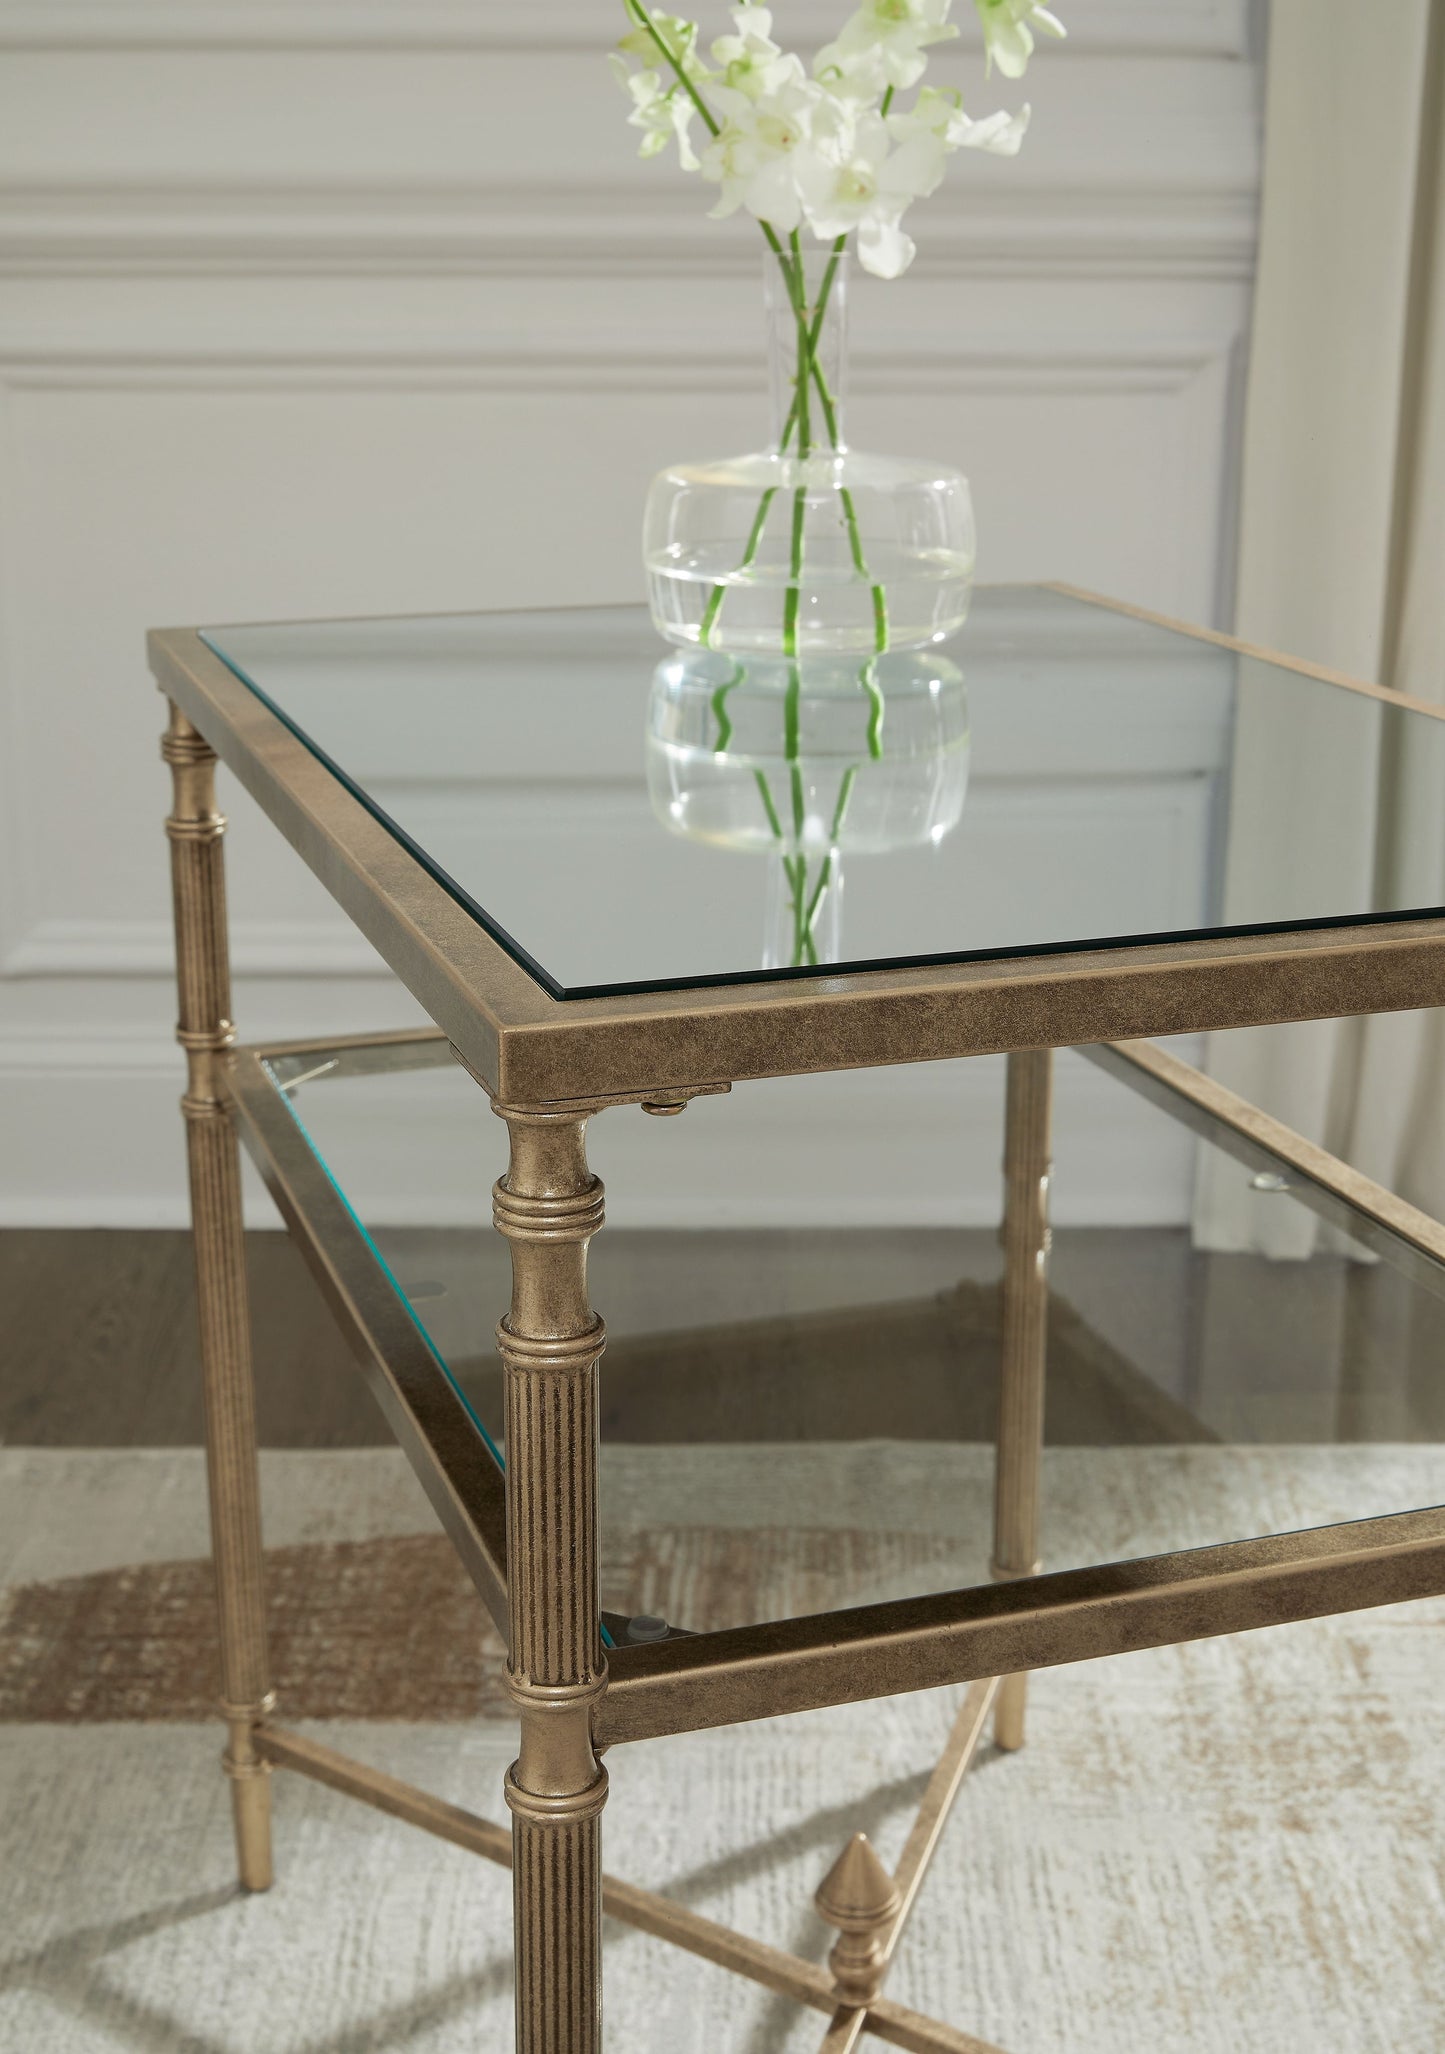 Cloverty - Aged Gold Finish - Rectangular End Table